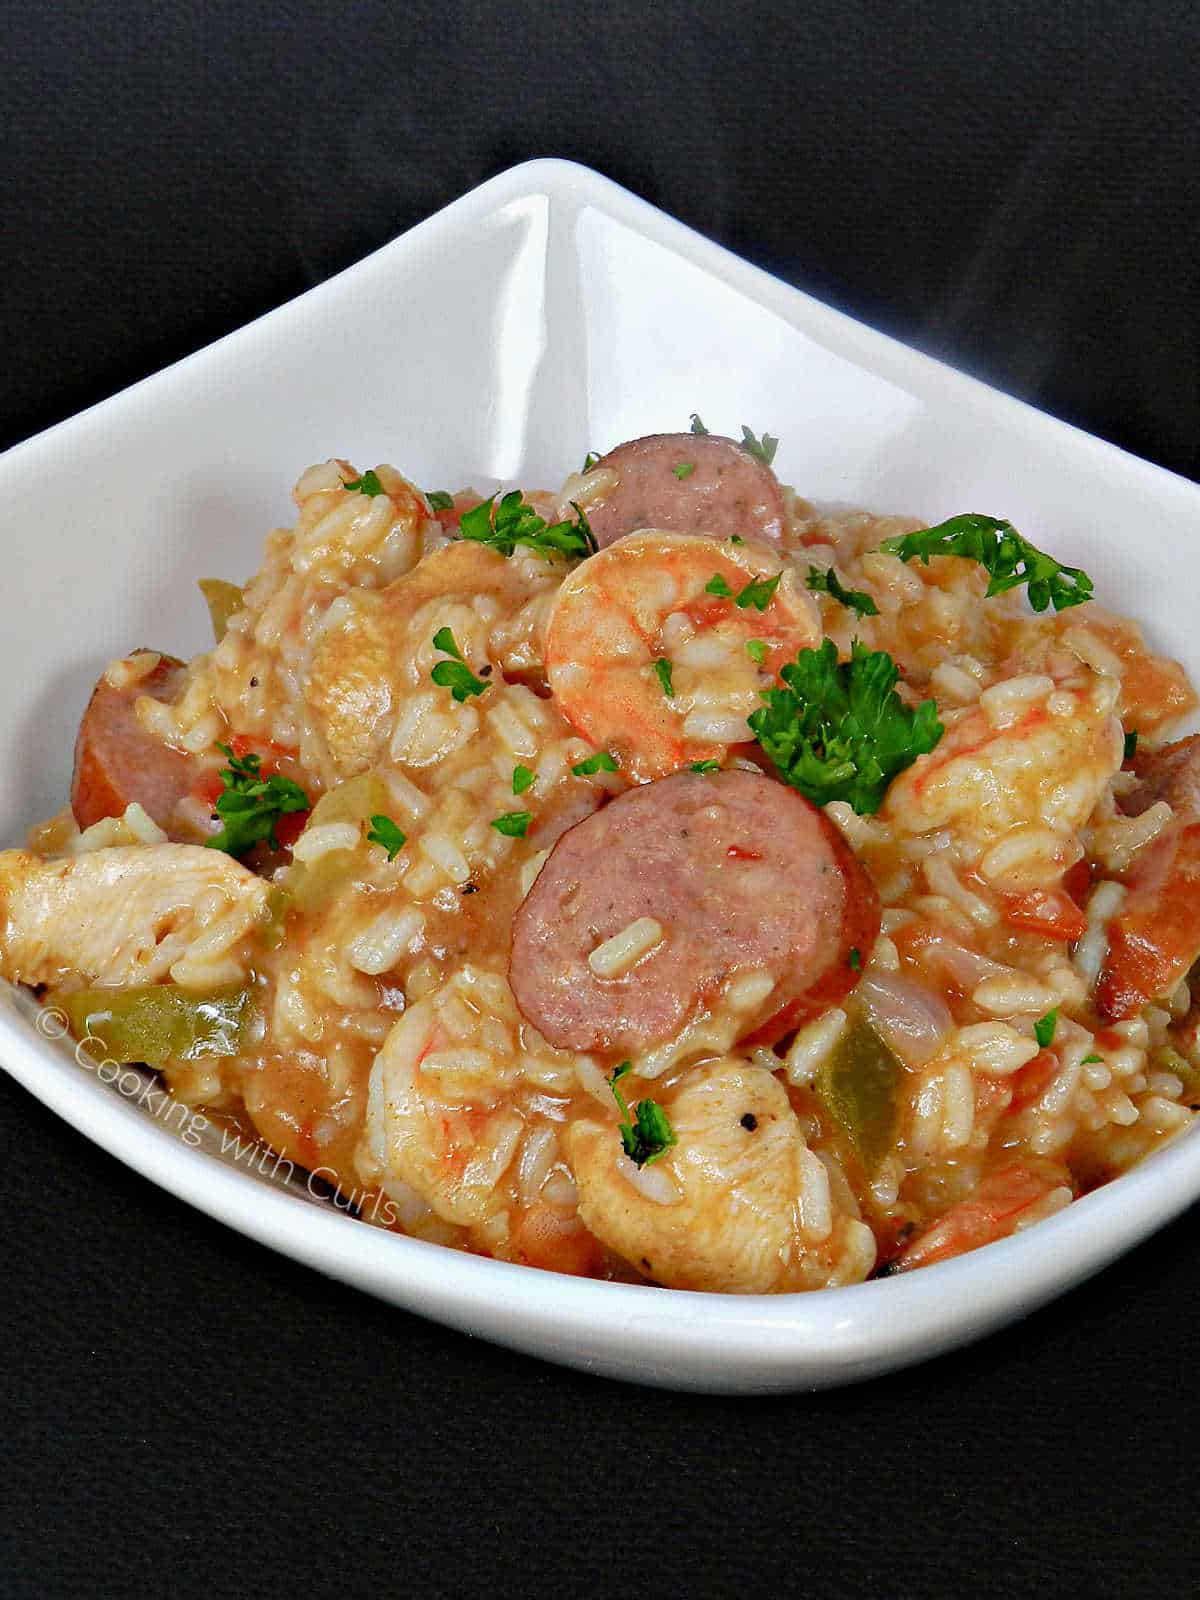 Shrimp Jambalaya with sliced sausage and chicken with rice in a bowl.